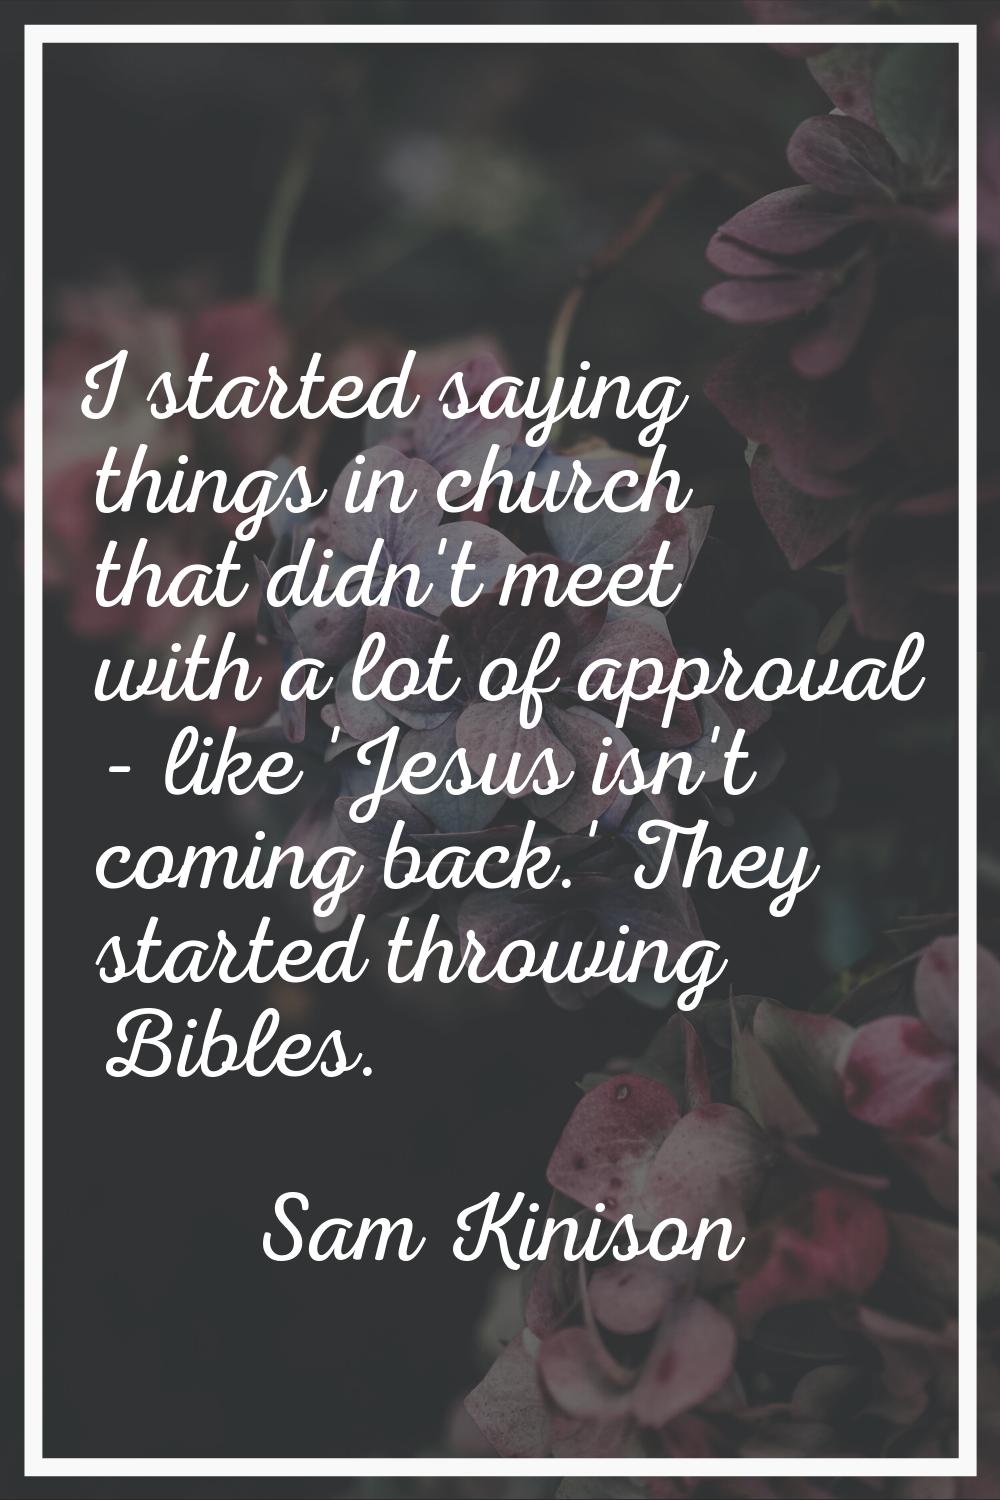 I started saying things in church that didn't meet with a lot of approval - like 'Jesus isn't comin